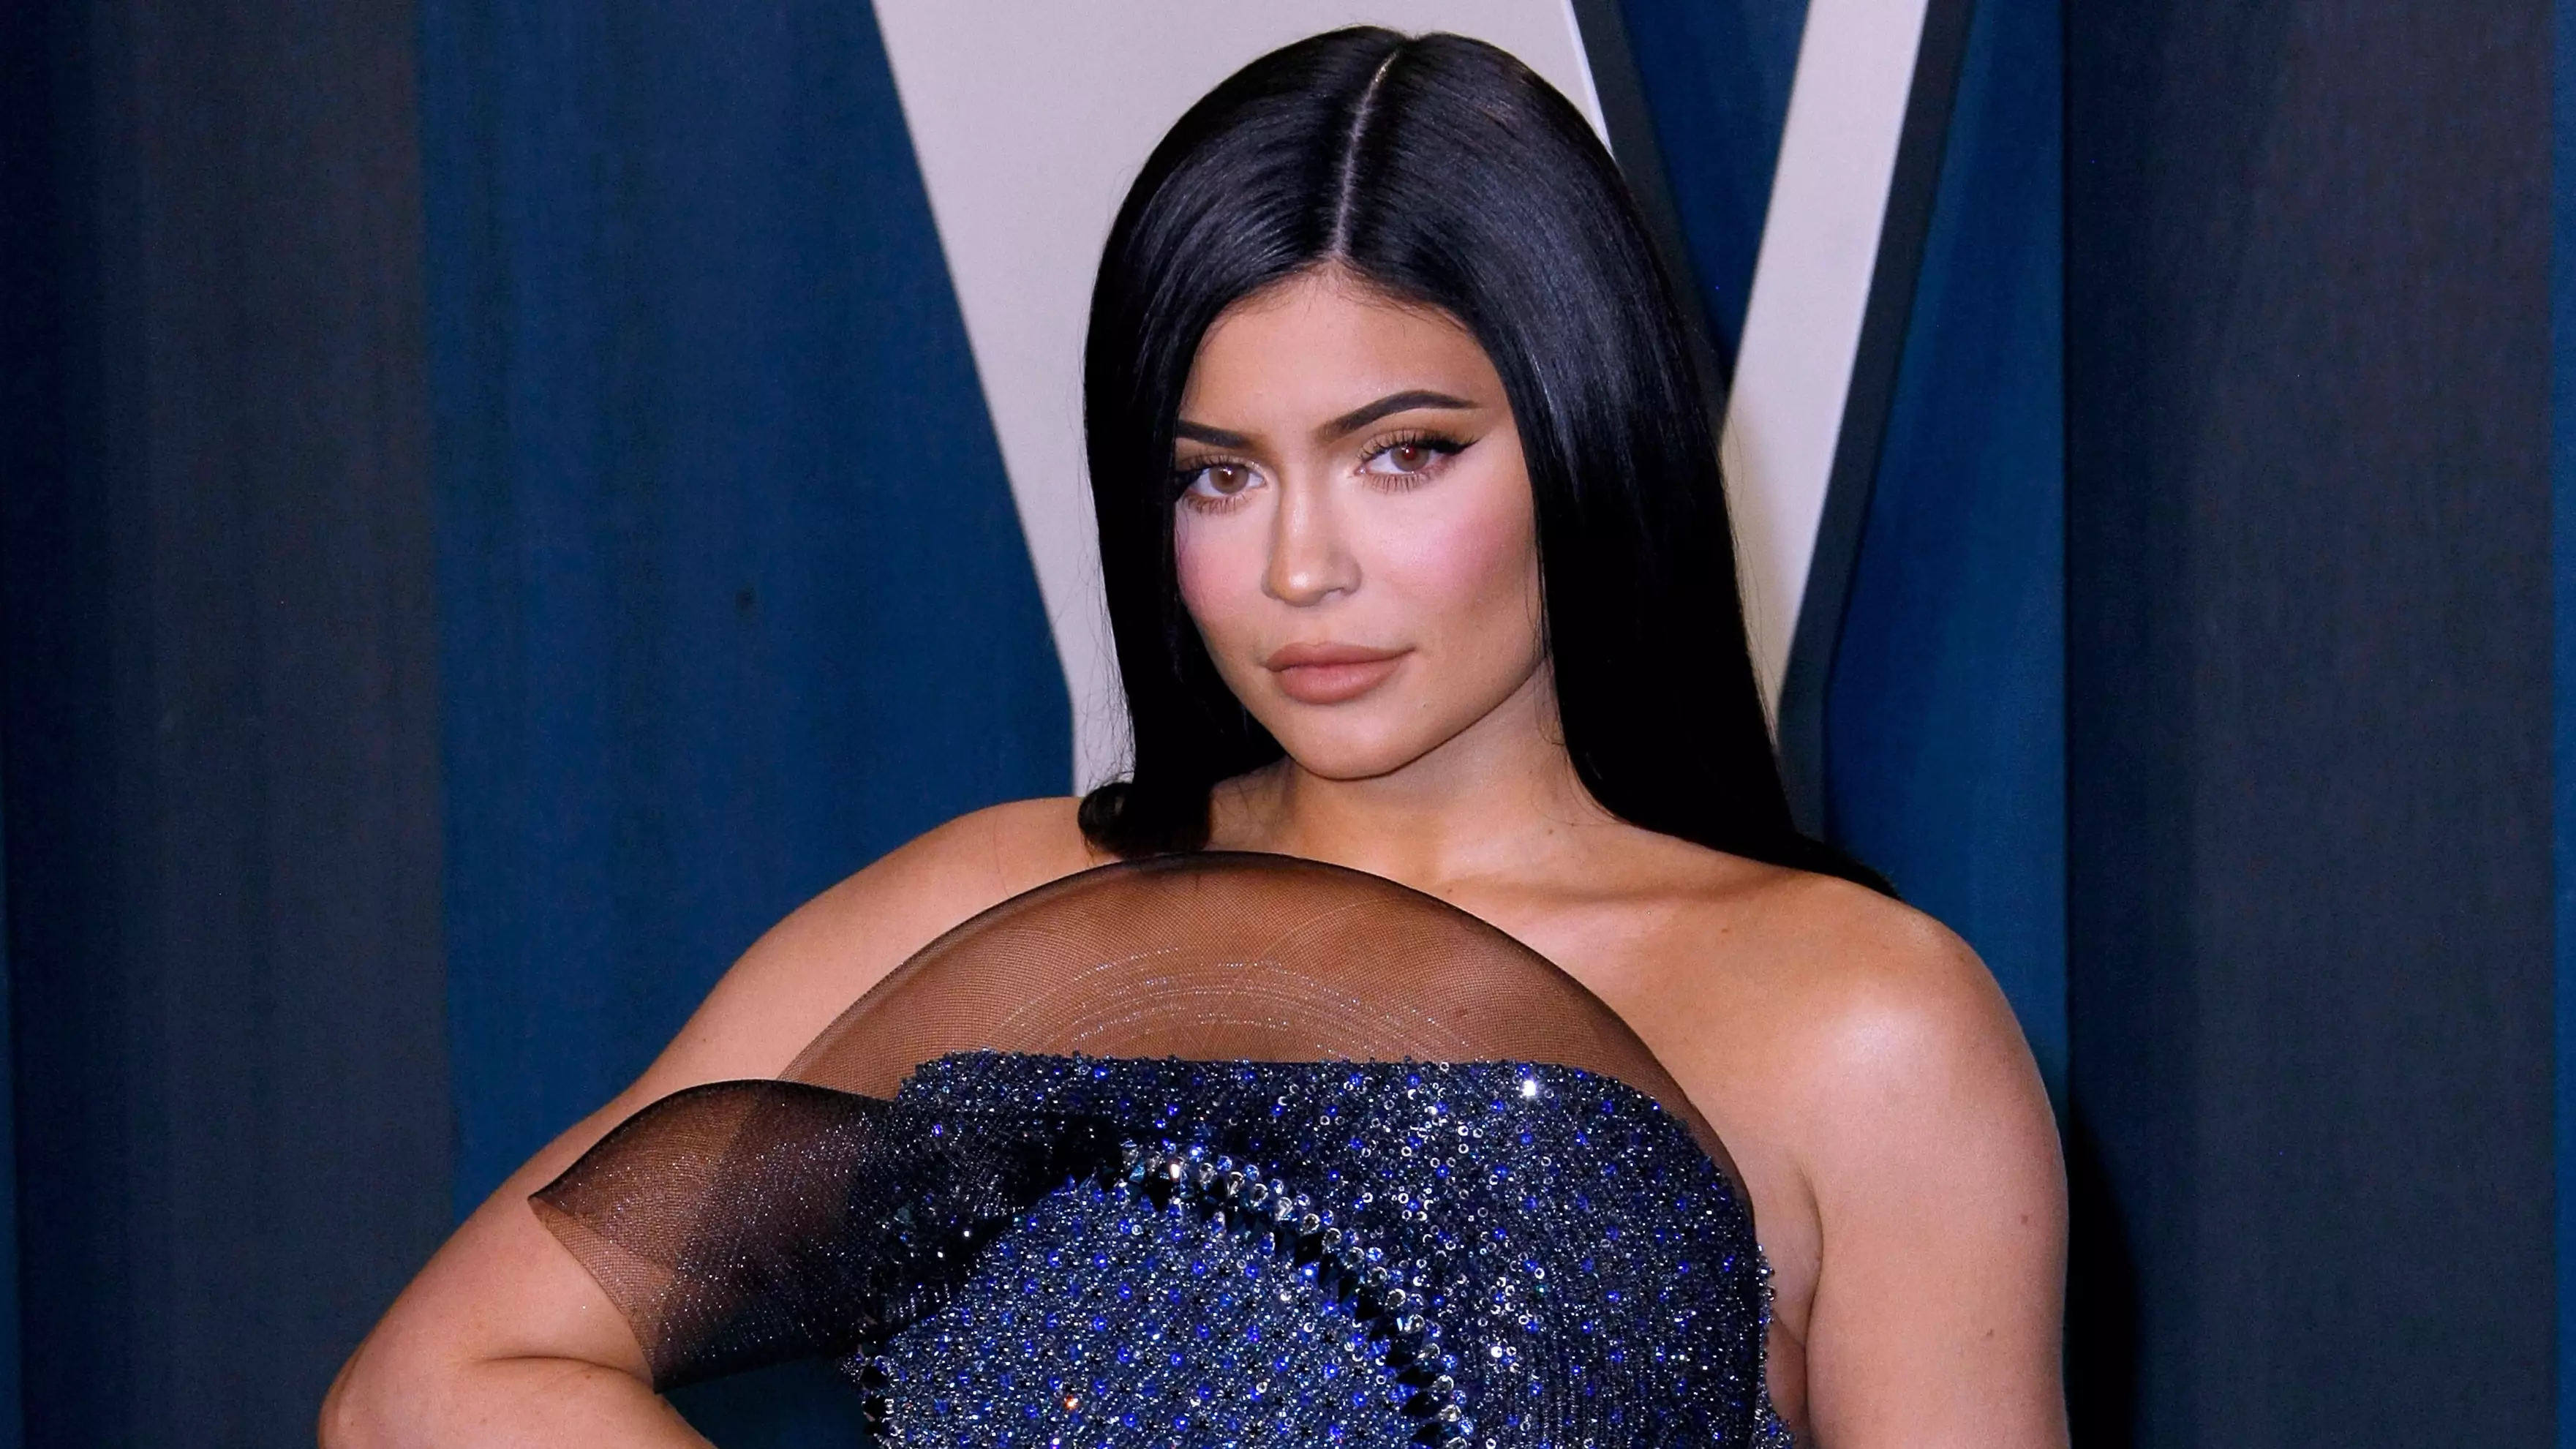 Kylie Jenner Has Donated $1 Million To LA Hospitals For Coronavirus Medical Supplies